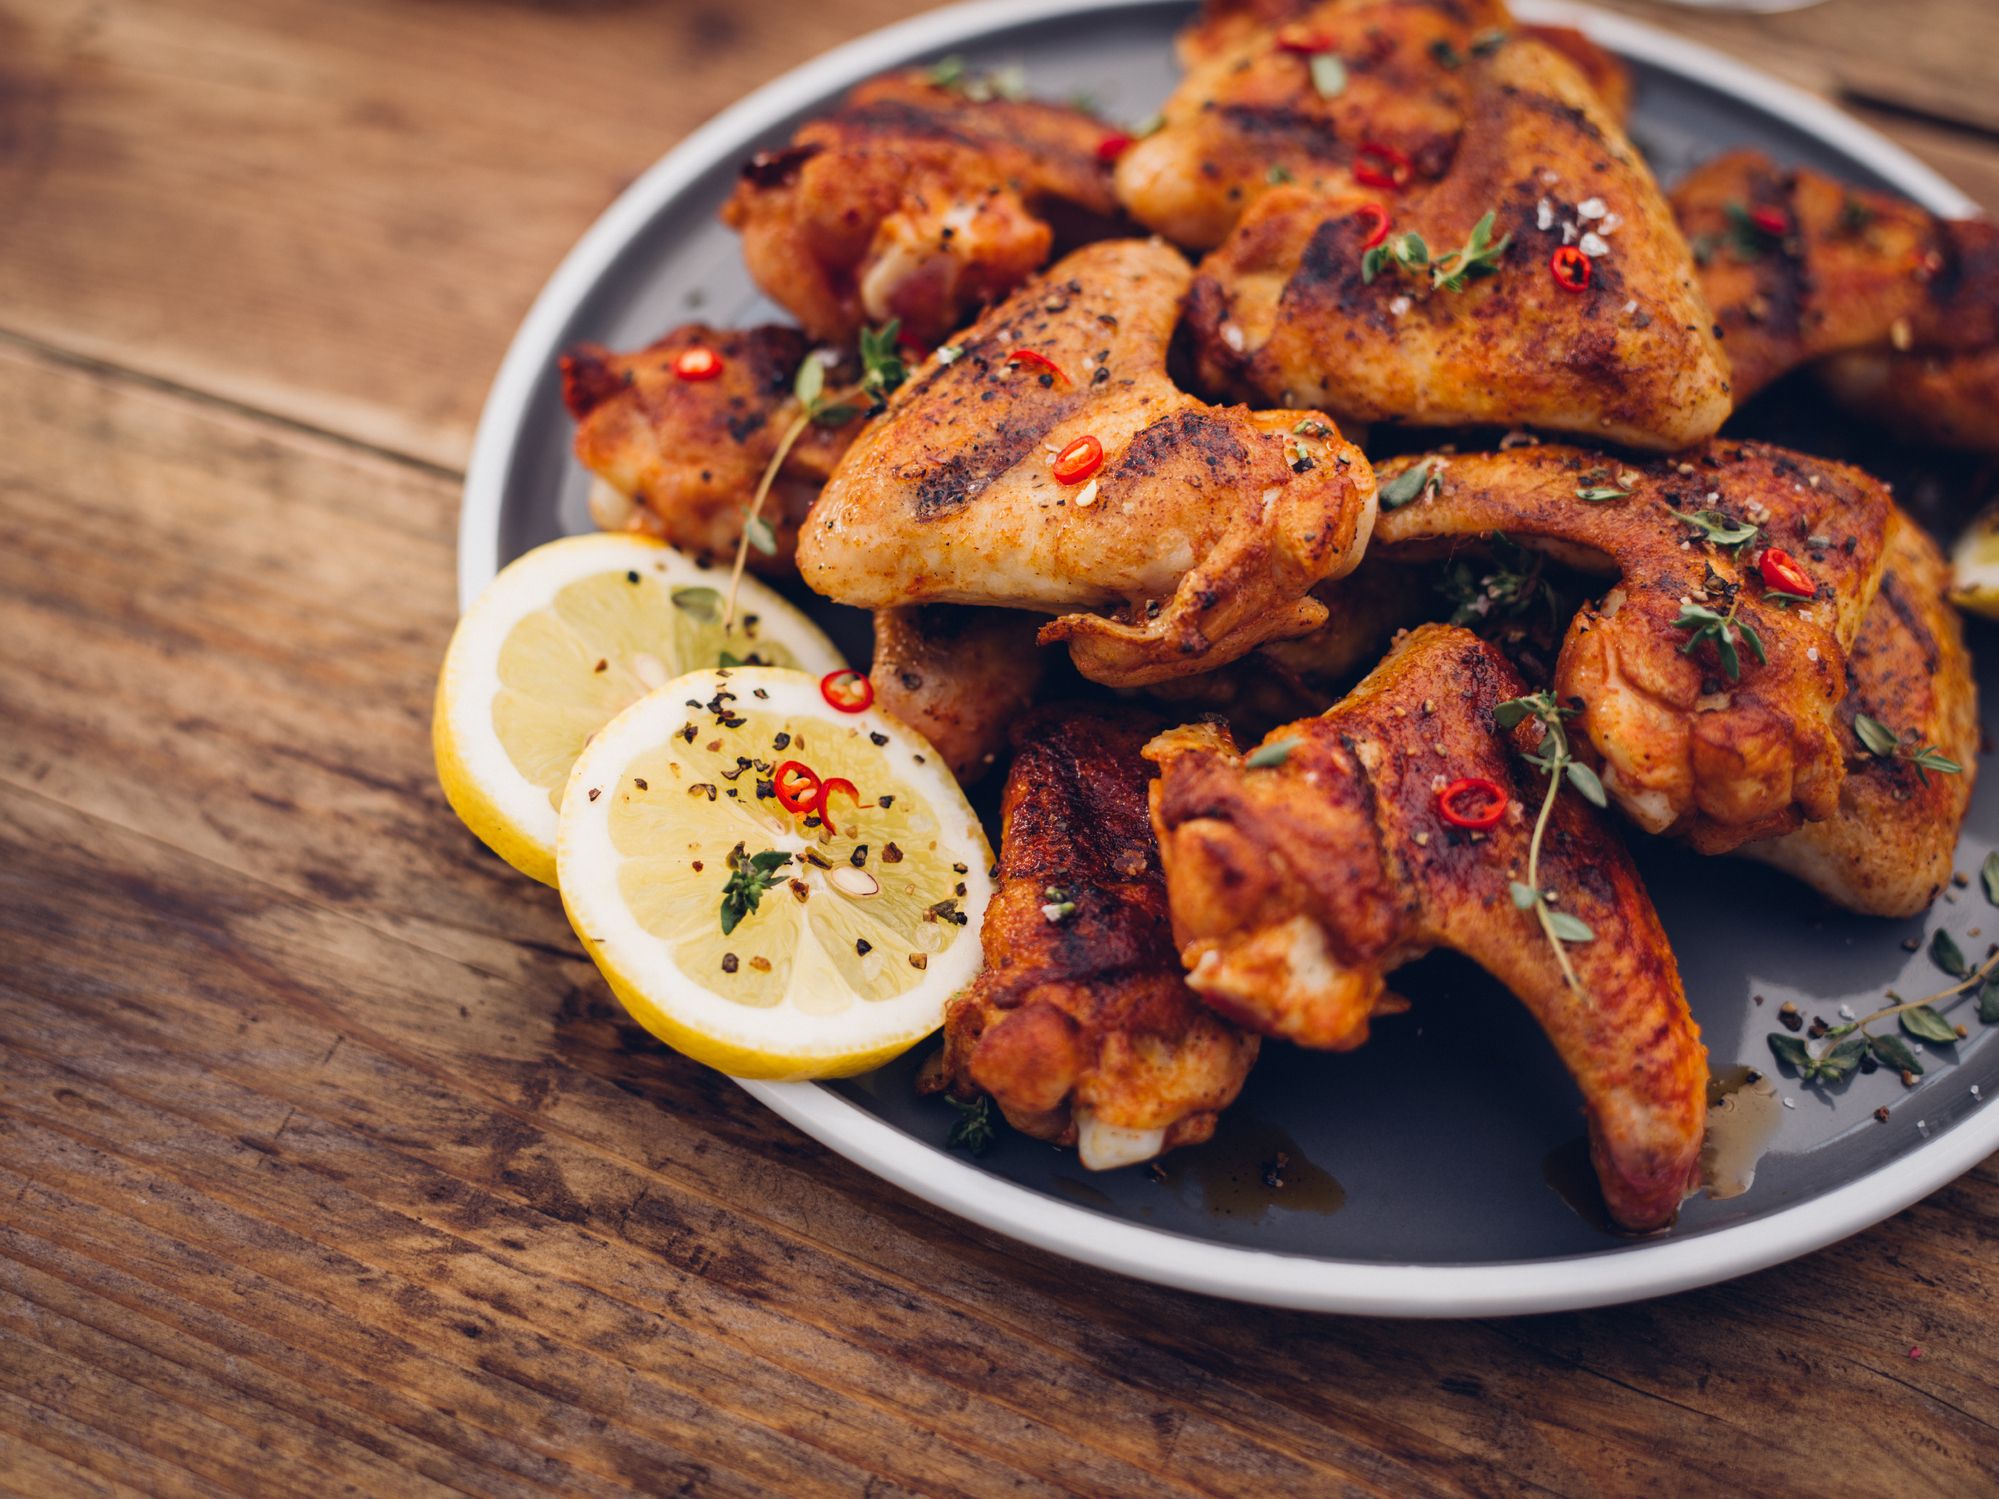 https://hips.hearstapps.com/hmg-prod/images/chillie-sprinkled-spicy-chicken-wings-on-a-wooden-royalty-free-image-484806894-1554131875.jpg